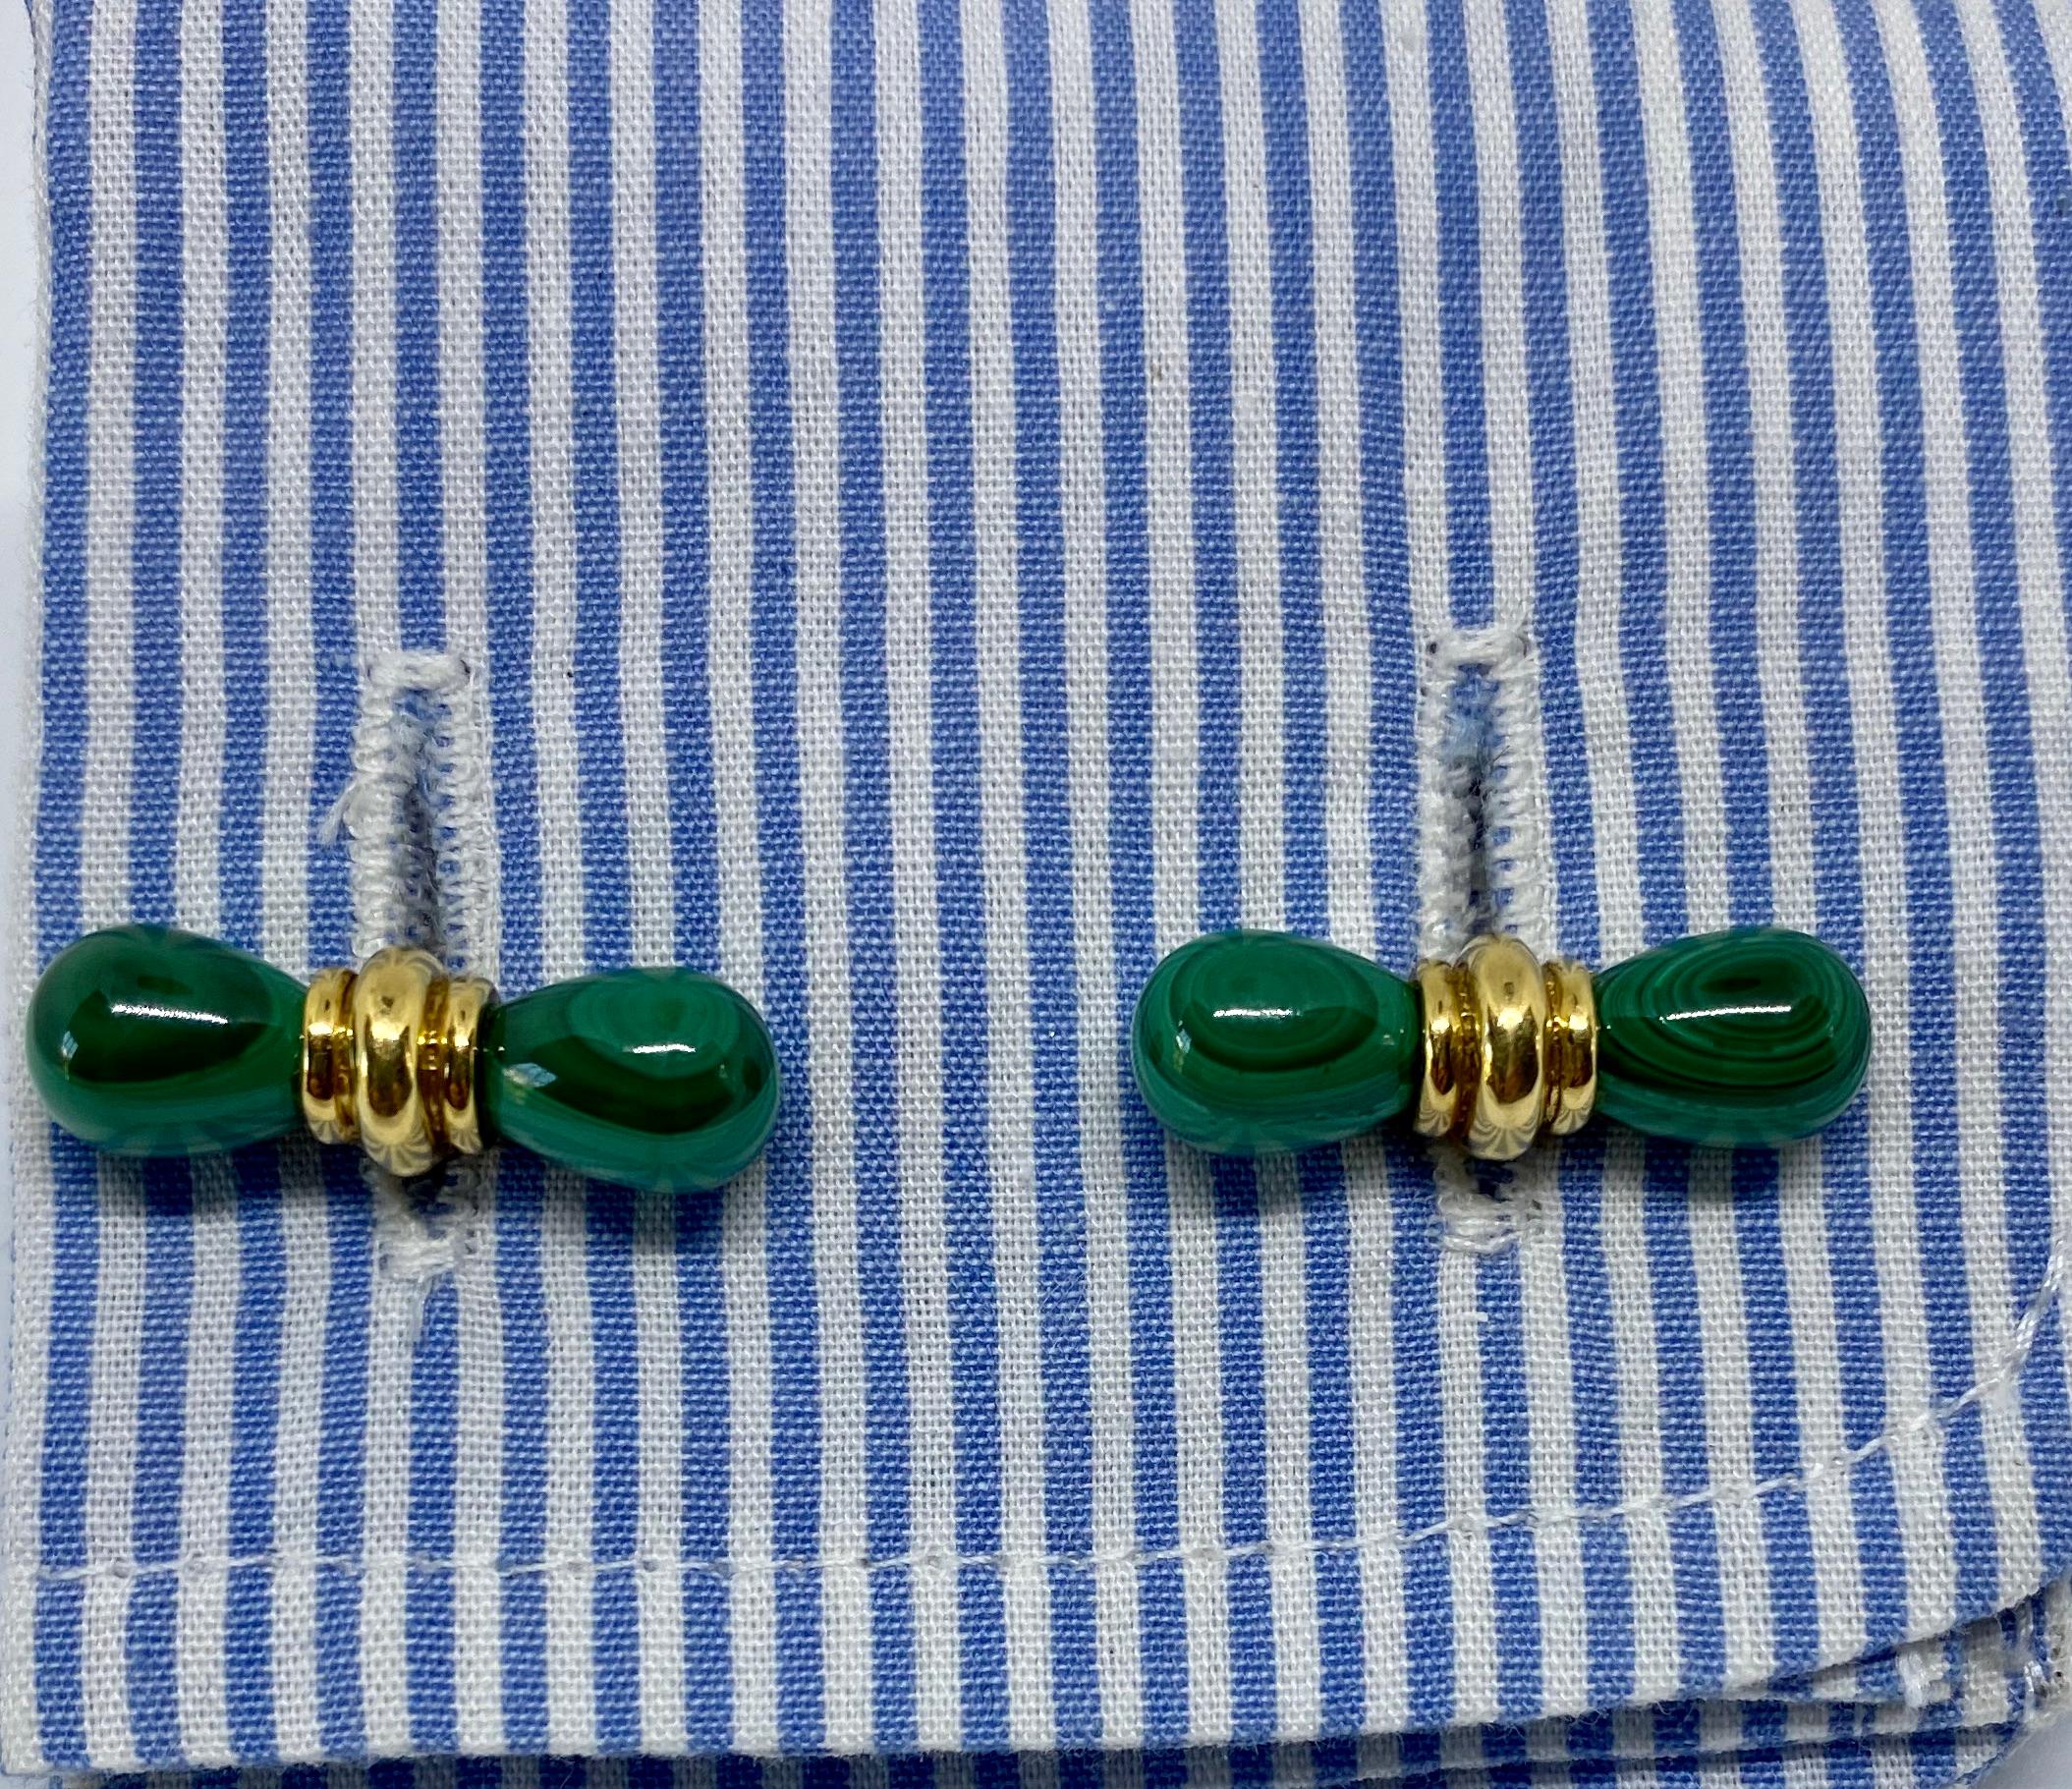 high quality alfred dunhill cufflinks